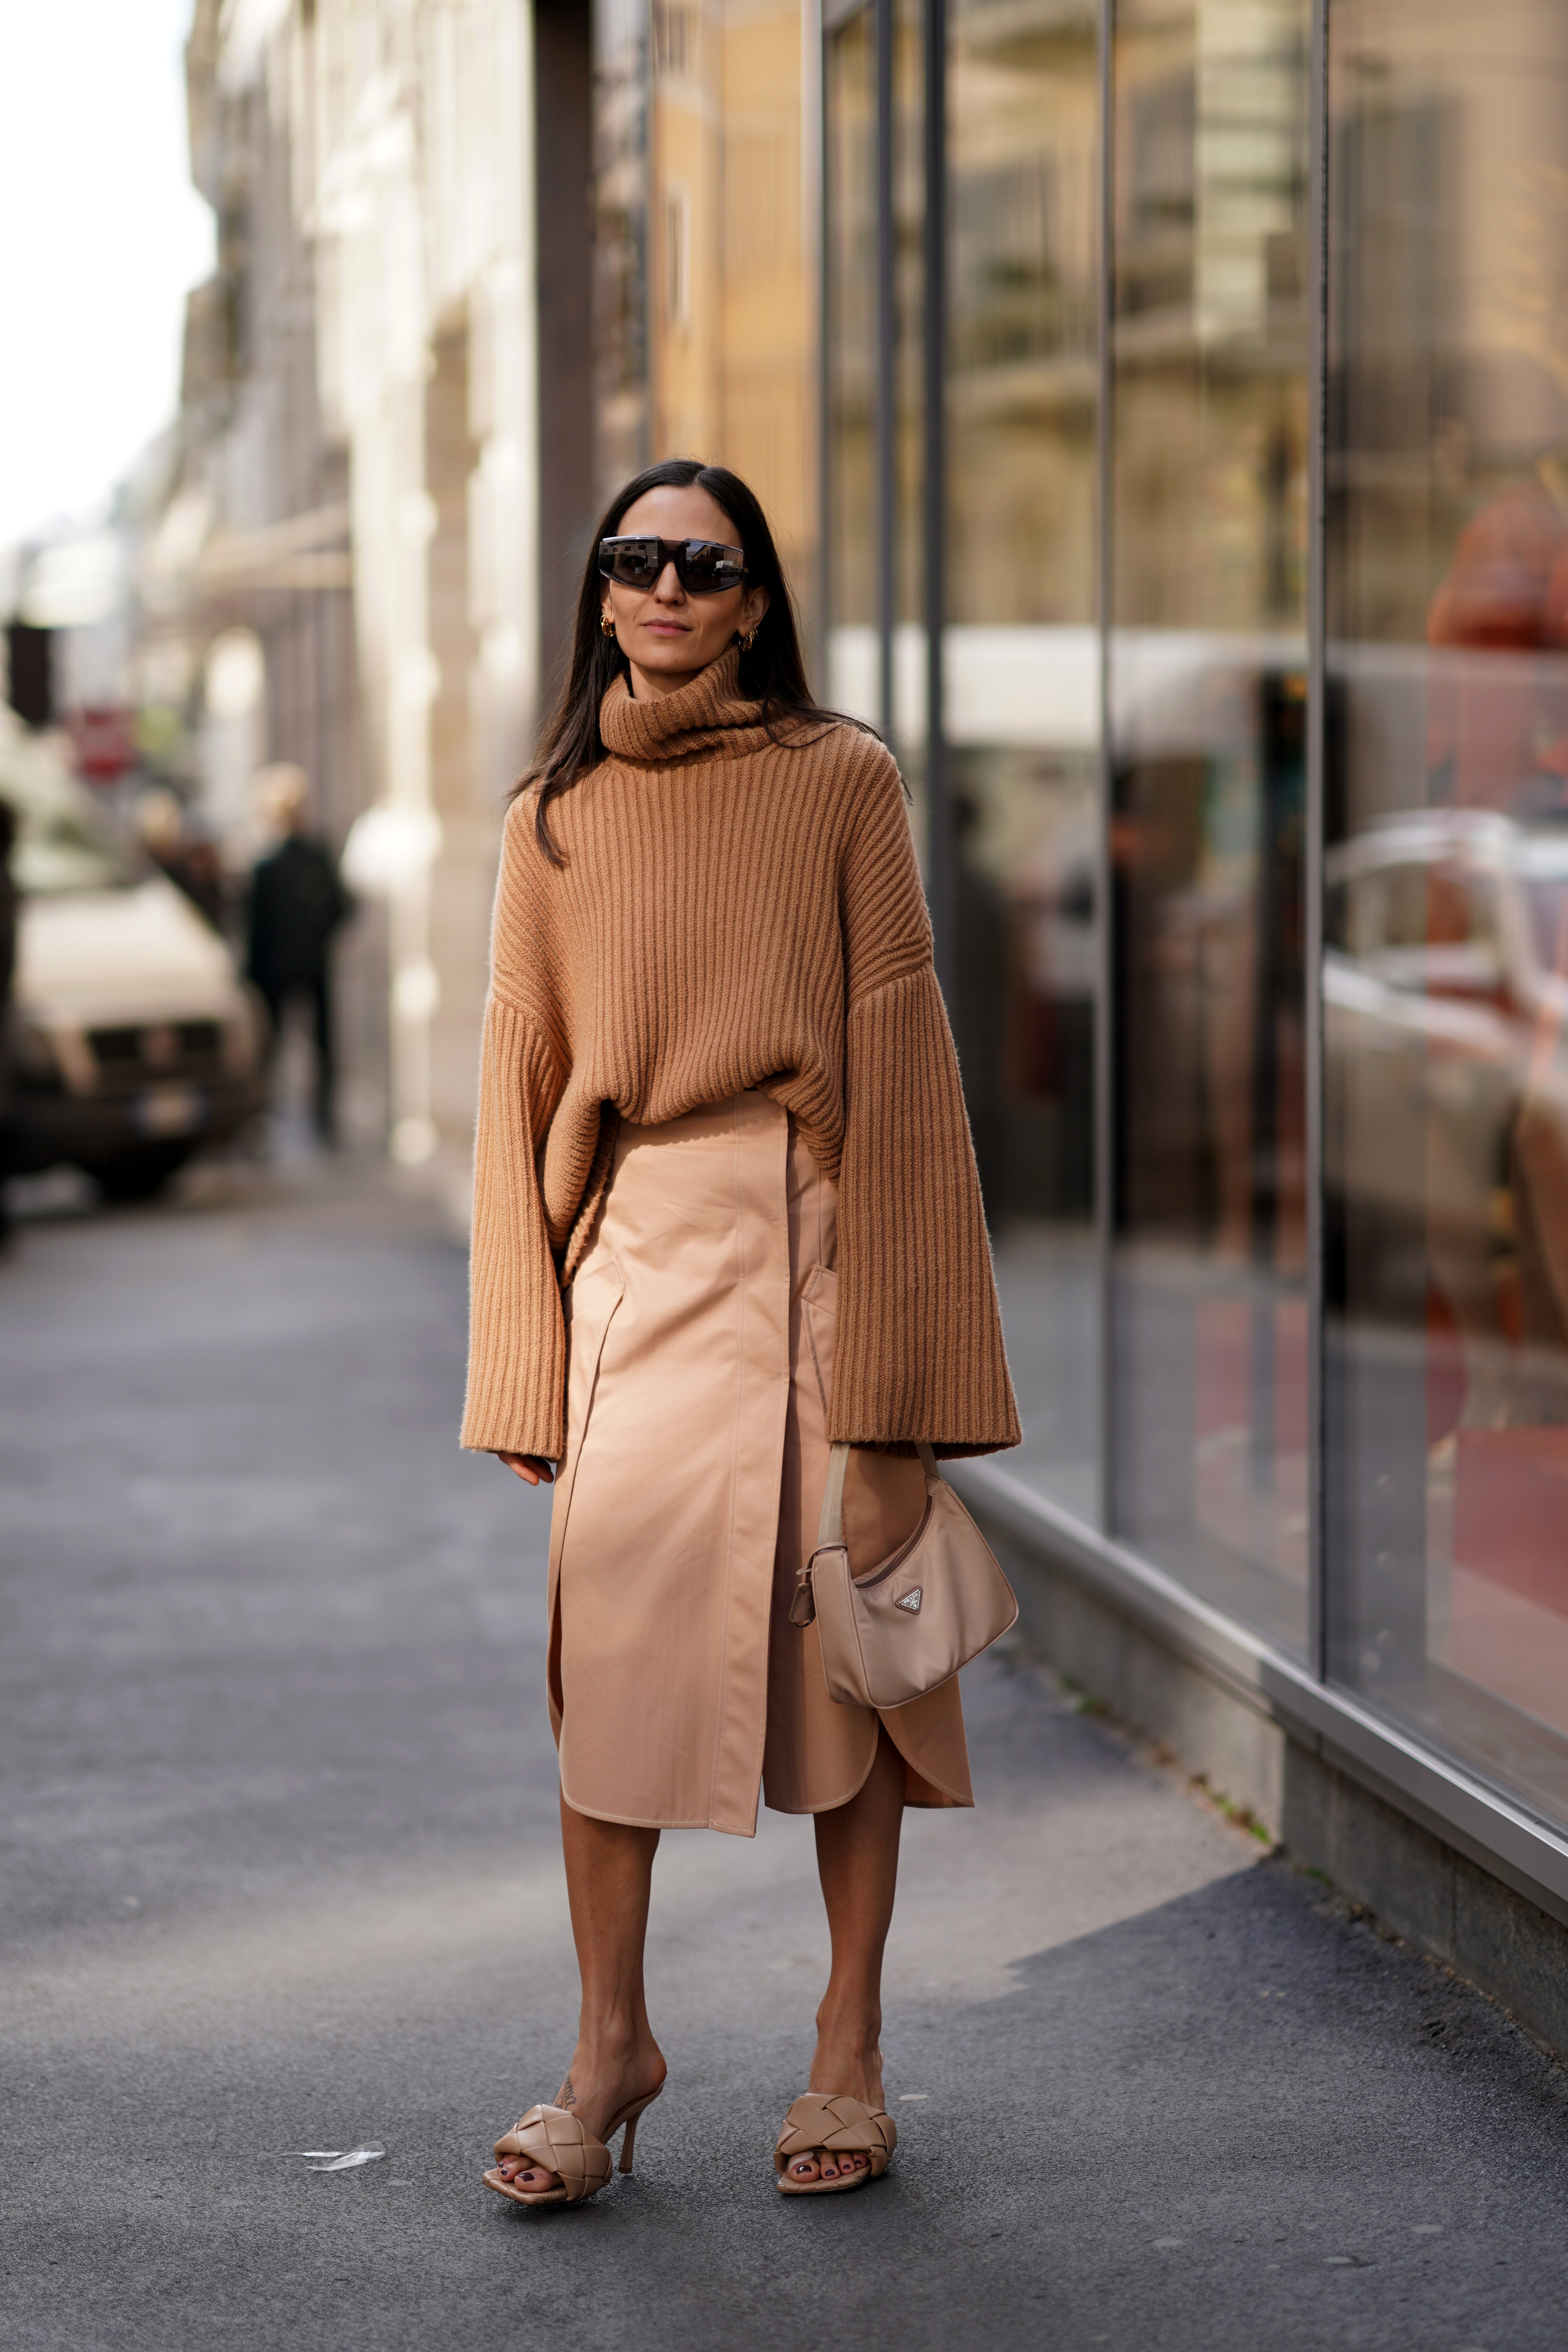 The Sweater Trend That Tells Everyone You Love Fashion | Who What Wear